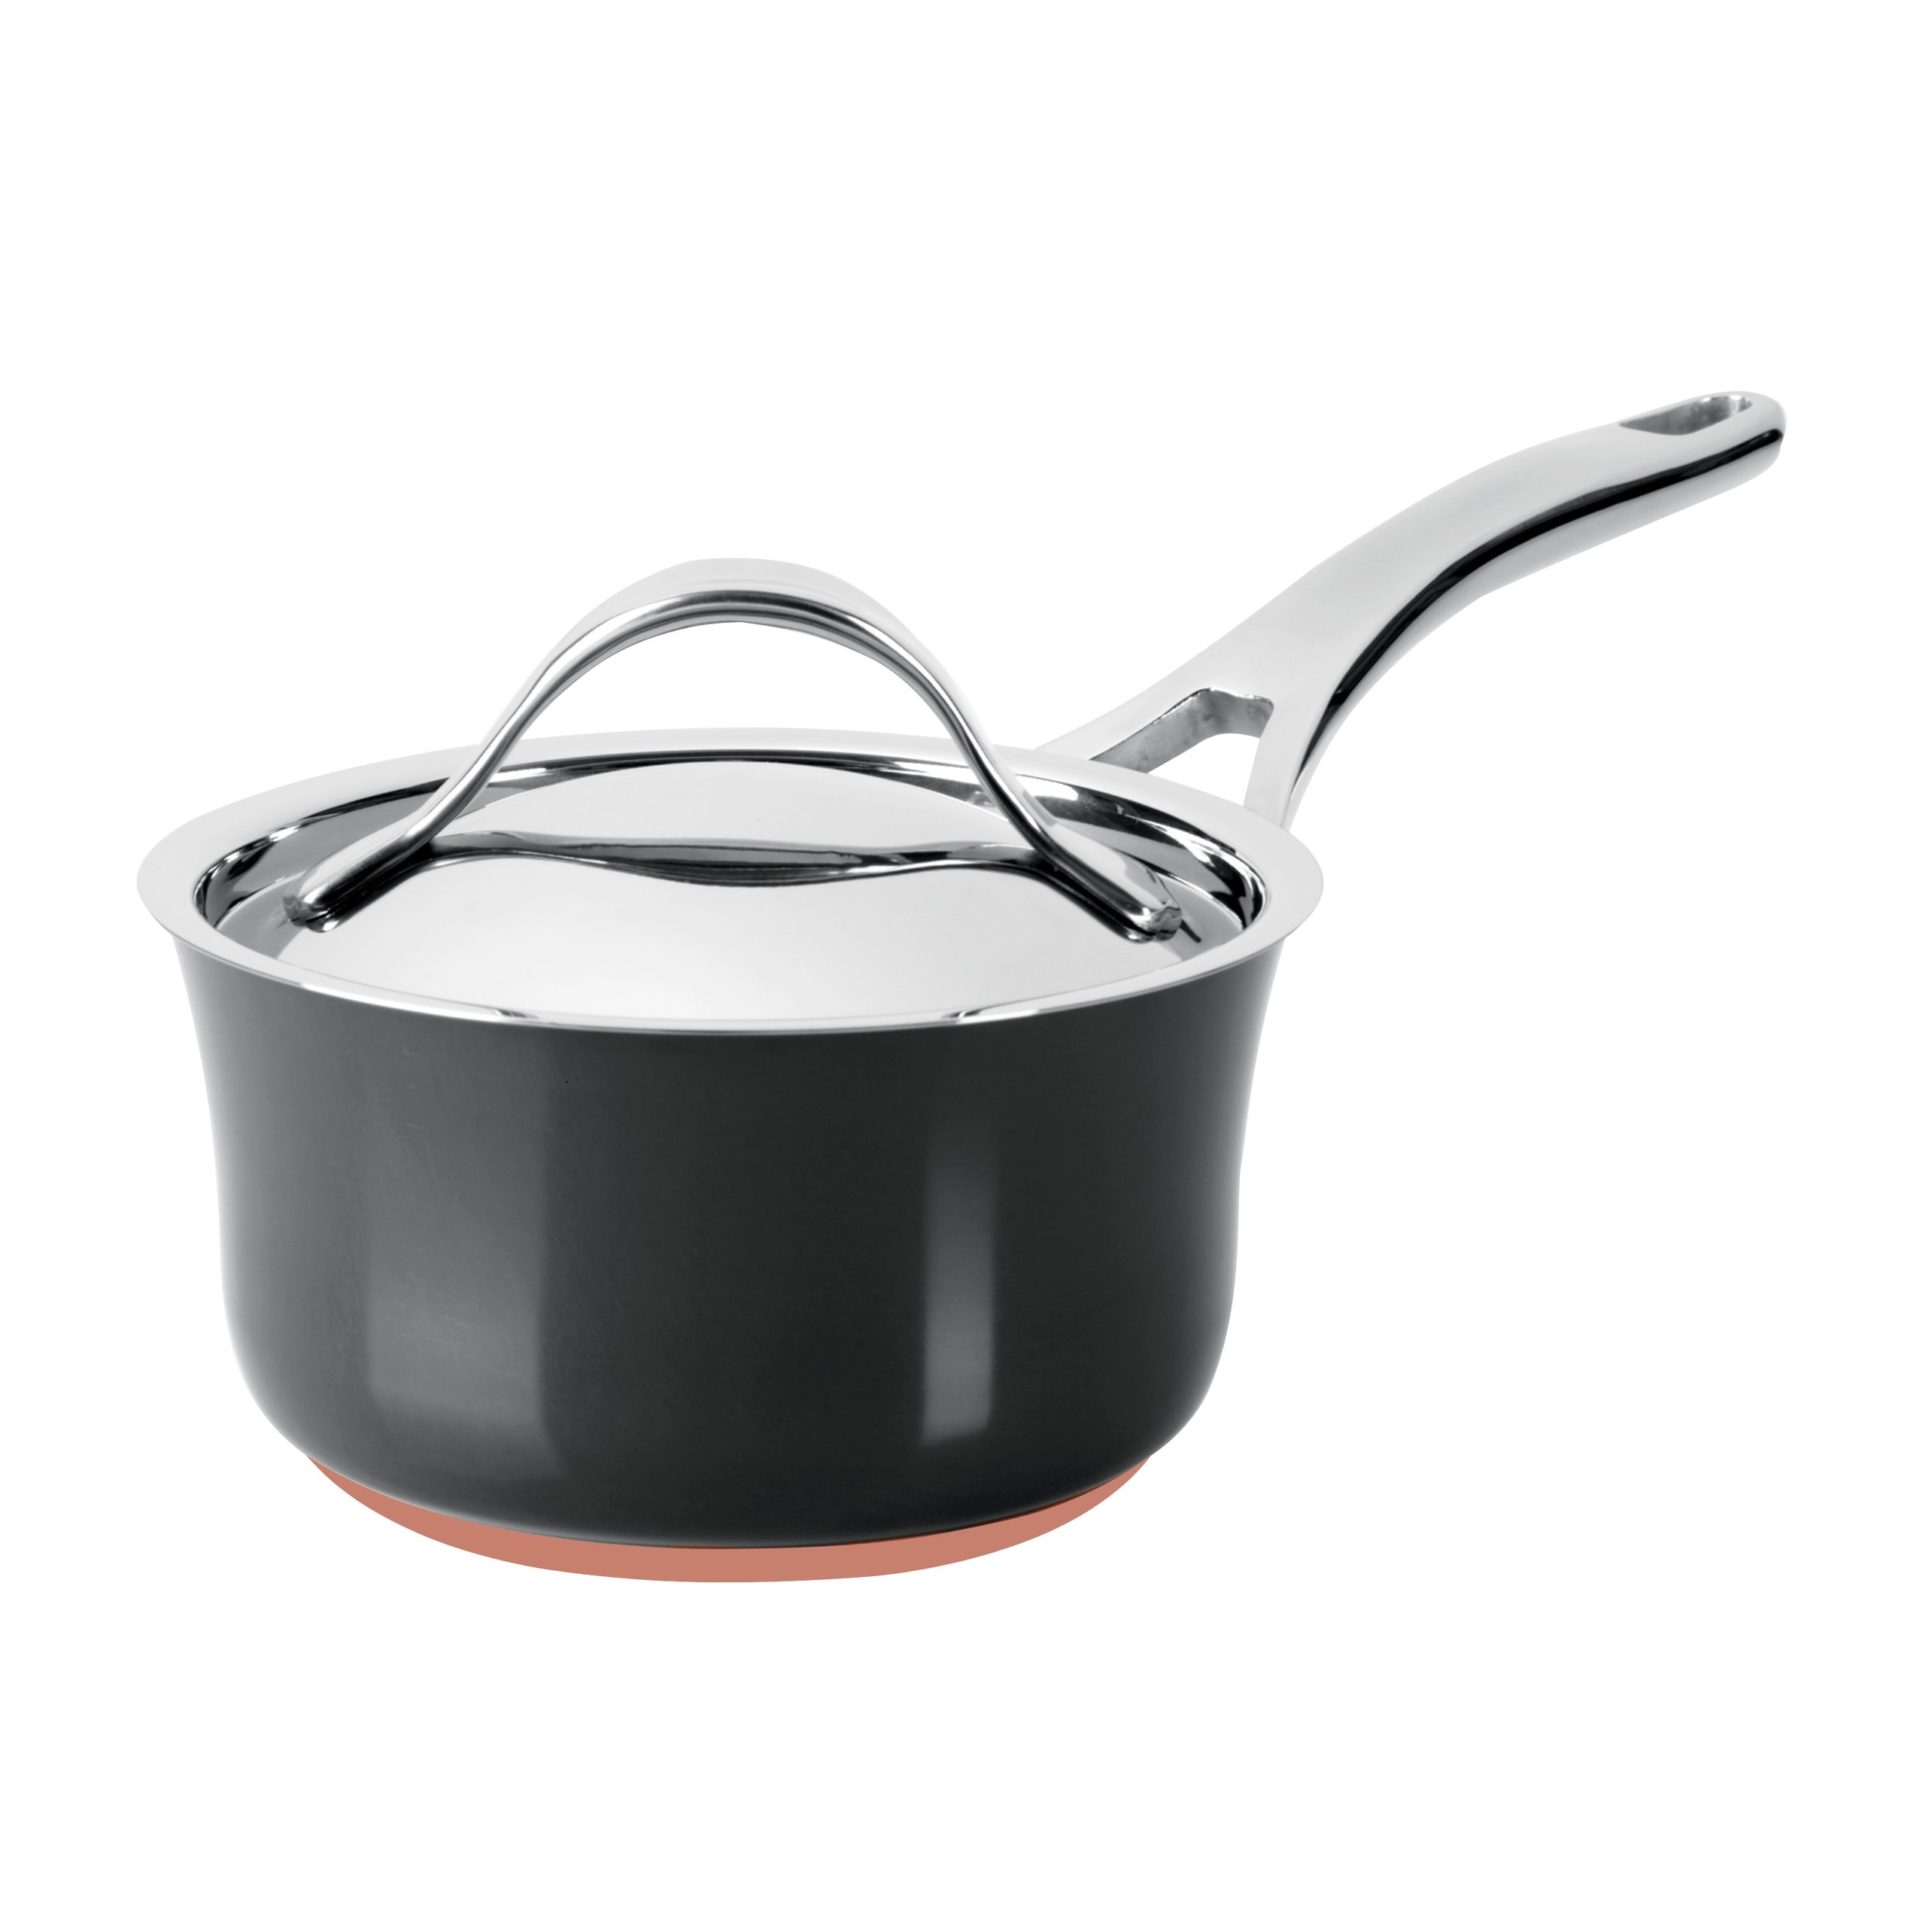 https://ak1.ostkcdn.com/images/products/is/images/direct/5b7081297f1340647fea614a426c1dd11ecc8101/Anolon-Nouvelle-Copper-Stainless-Steel-and-Nonstick-Cookware-Induction-Pots-and-Pans-Set%2C-11-Piece%2C-Silver-and-Black.jpg